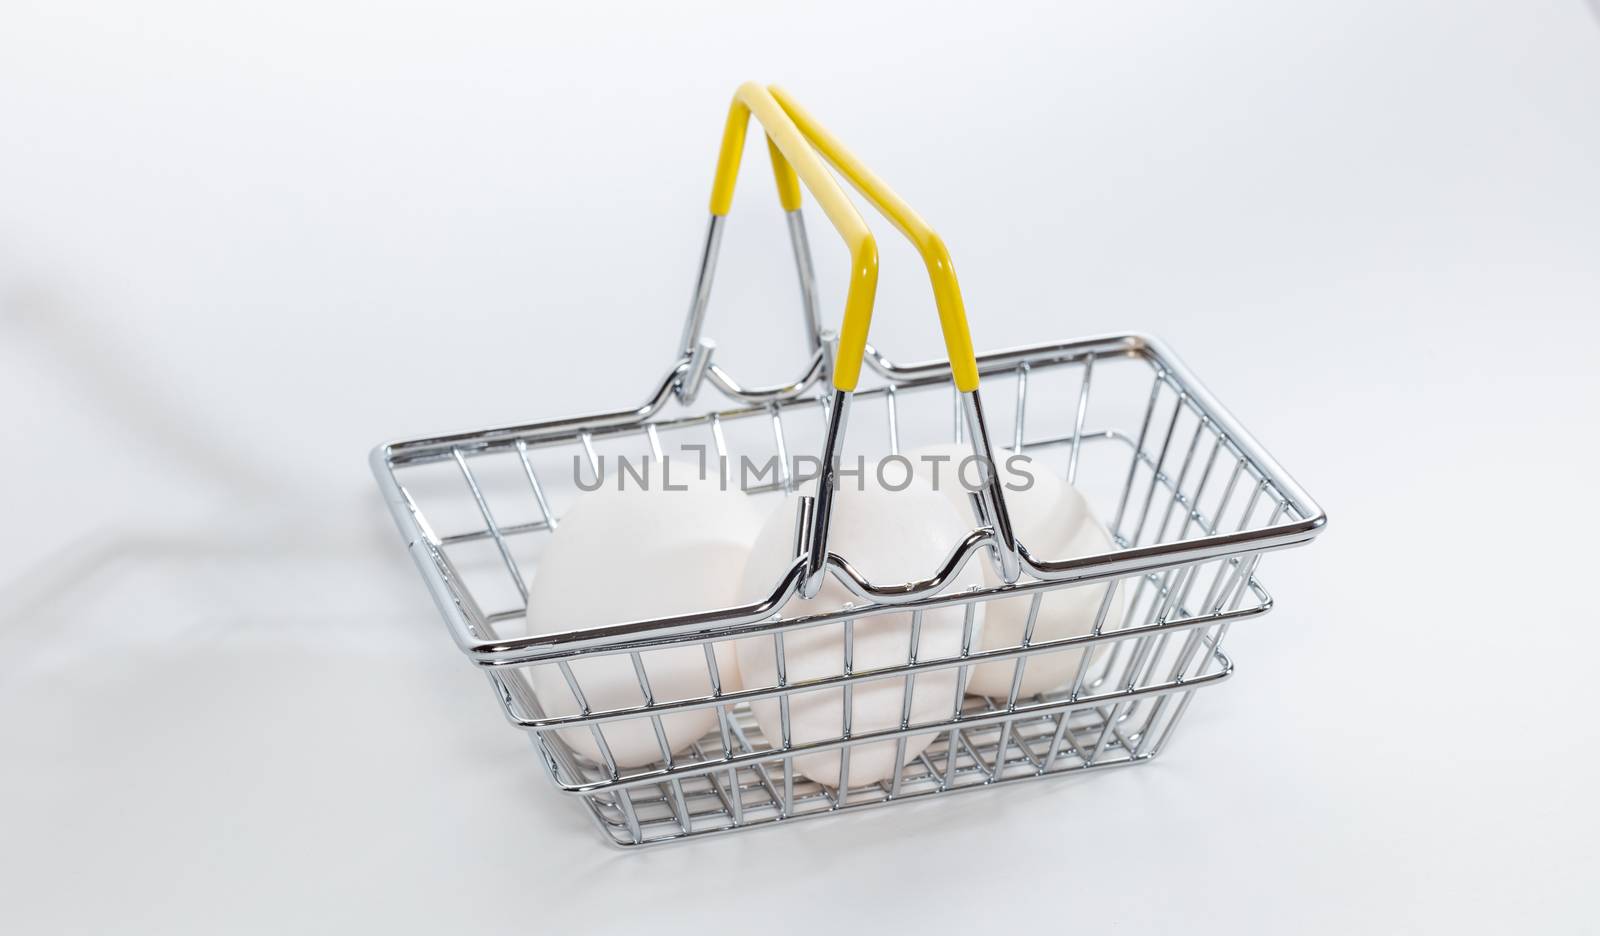 Fresh eggs in a shopping basket. High angle shot. Basket hands up. Shopping, purchasing, and food delivery concept. White background. Close up shot. Isolated.